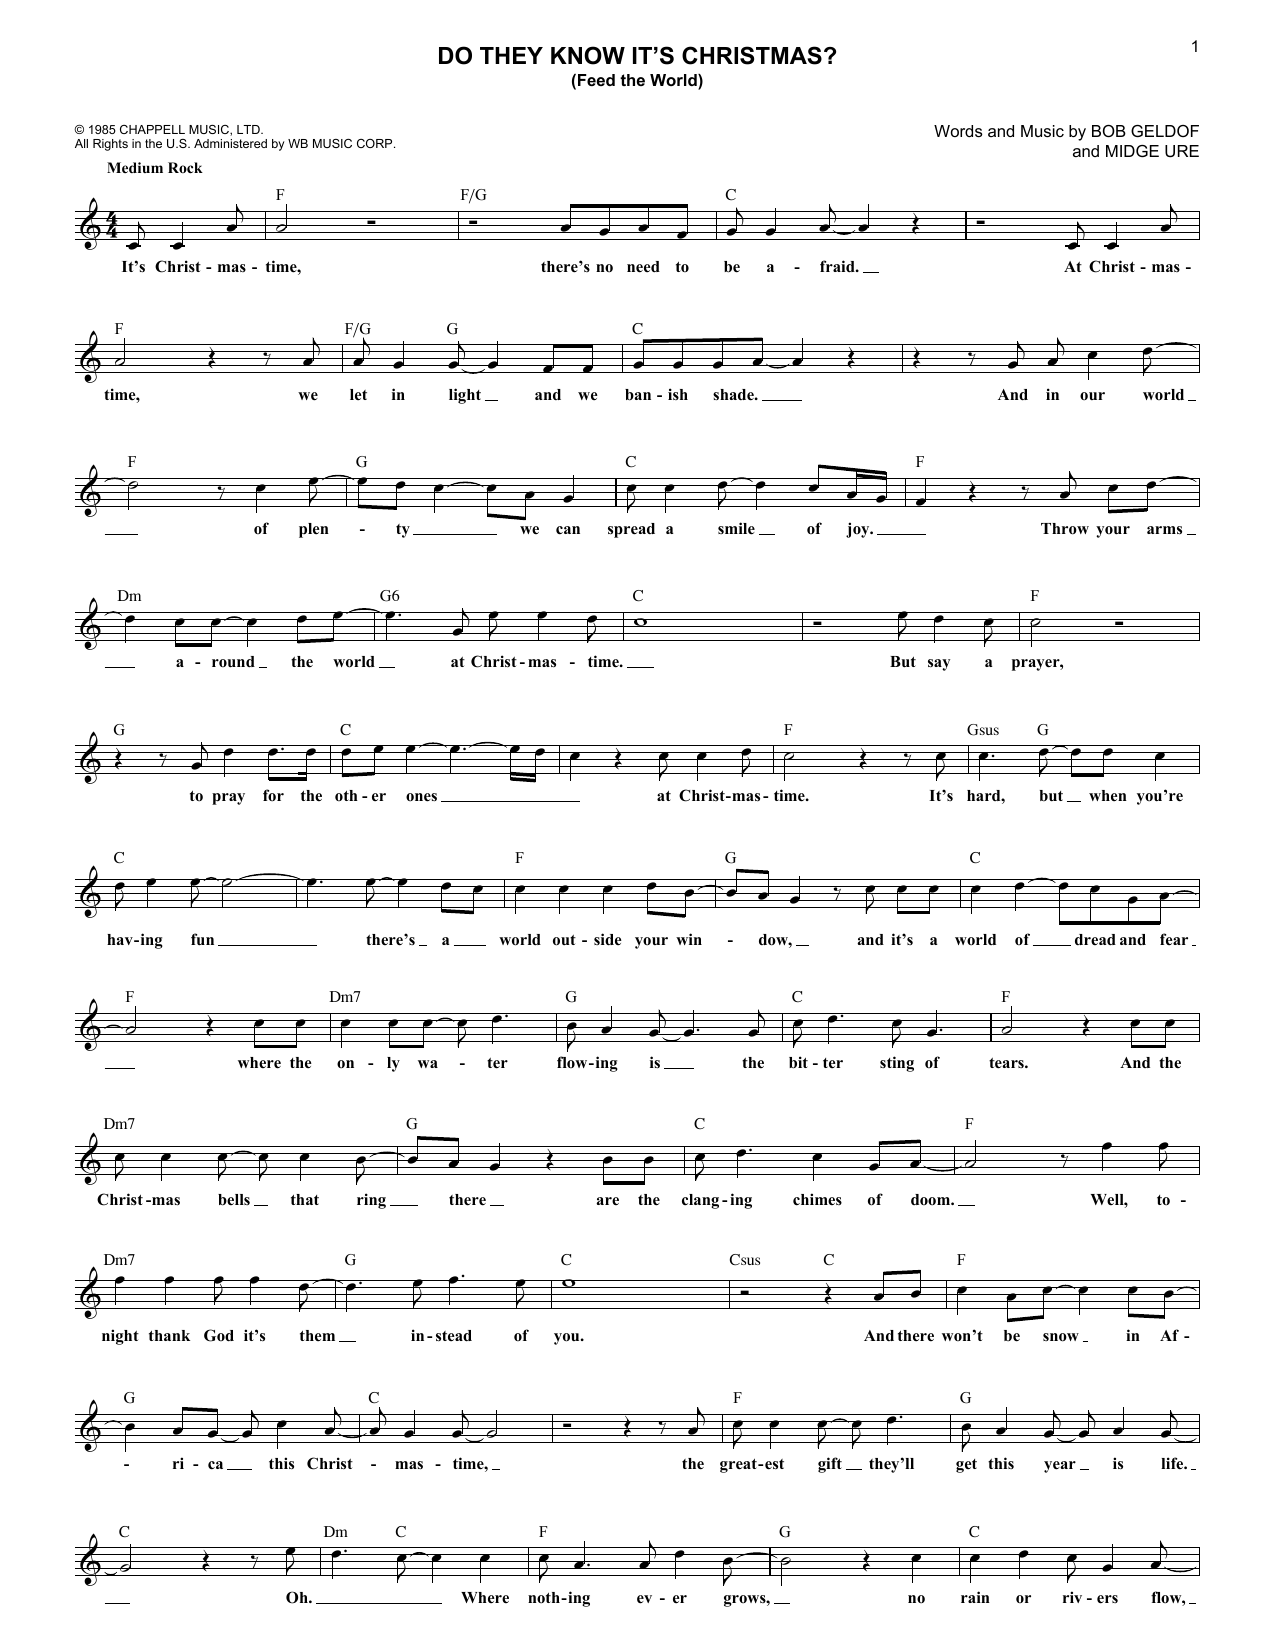 Do They Know It's Christmas? (Feed The World) sheet music